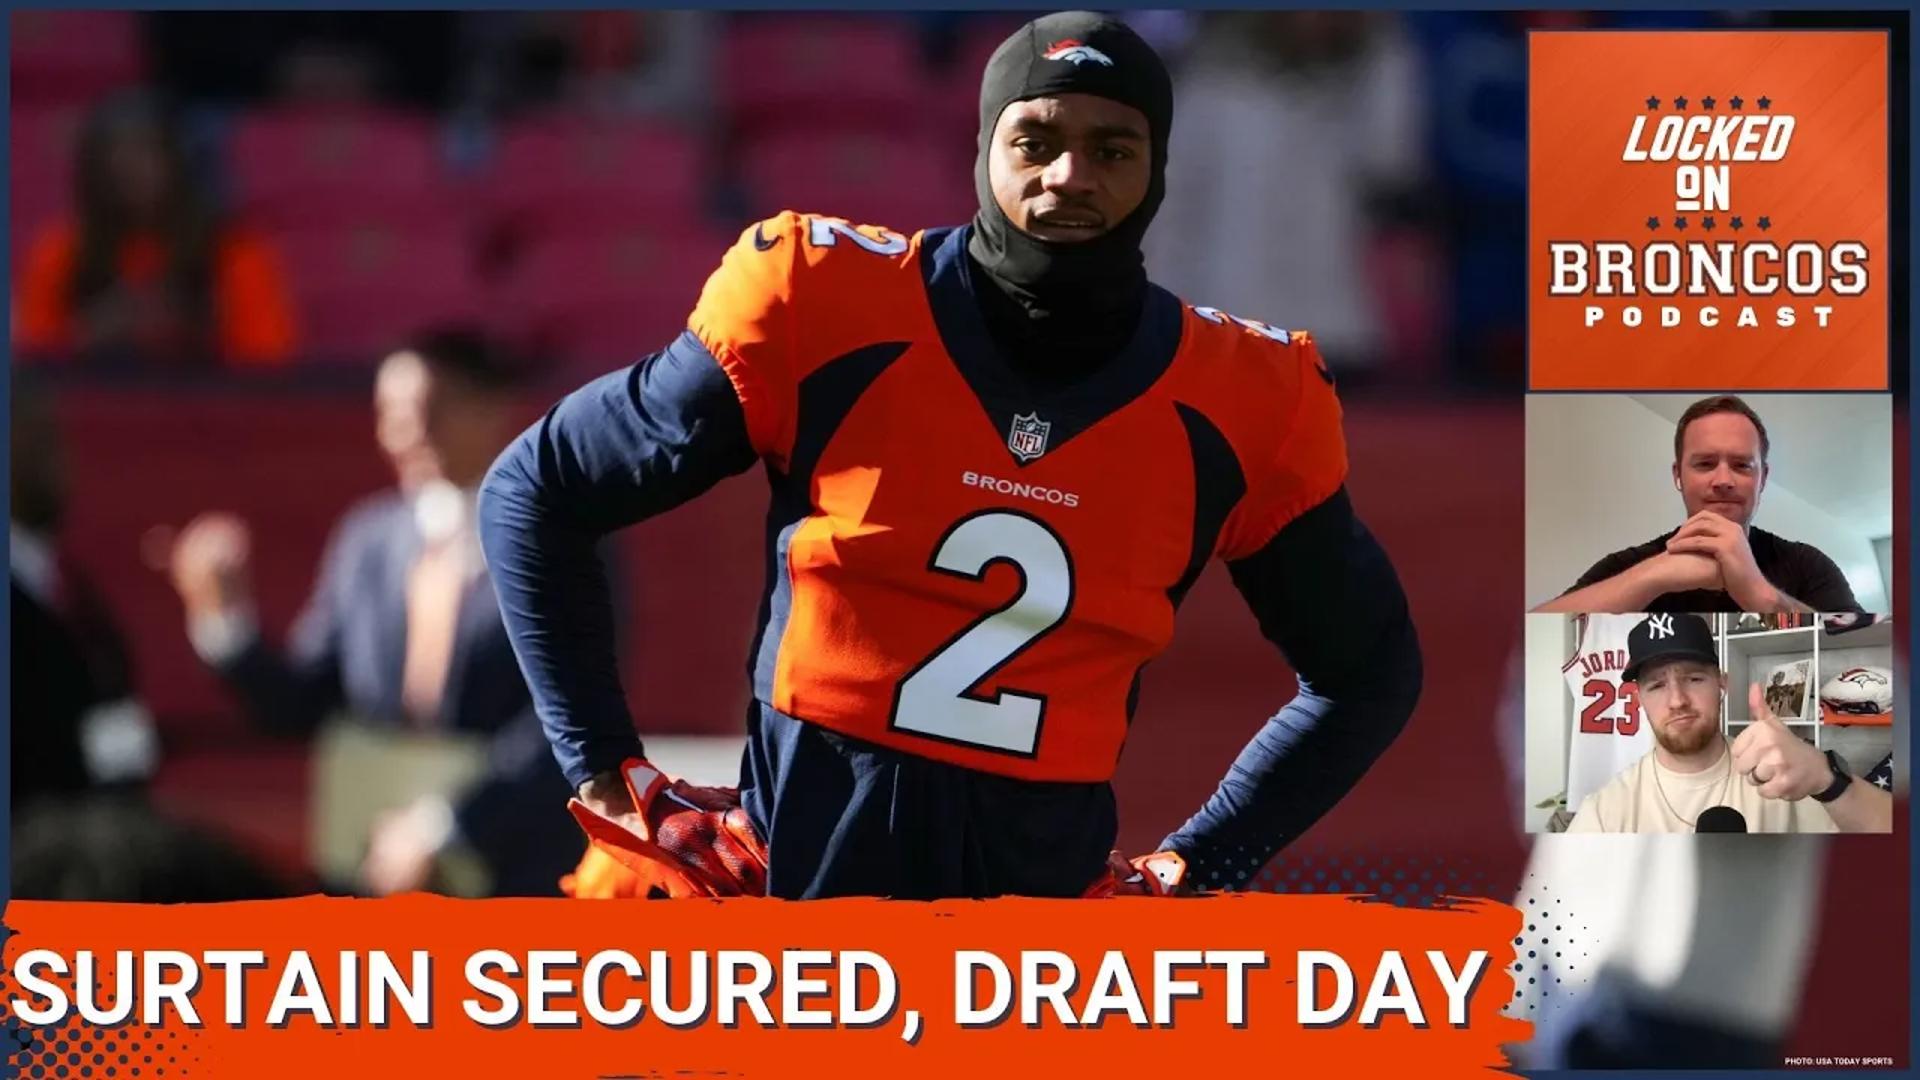 The Denver Broncos have picked up star cornerback Patrick Surtain's 5th-year option ahead of Thursday's NFL Draft